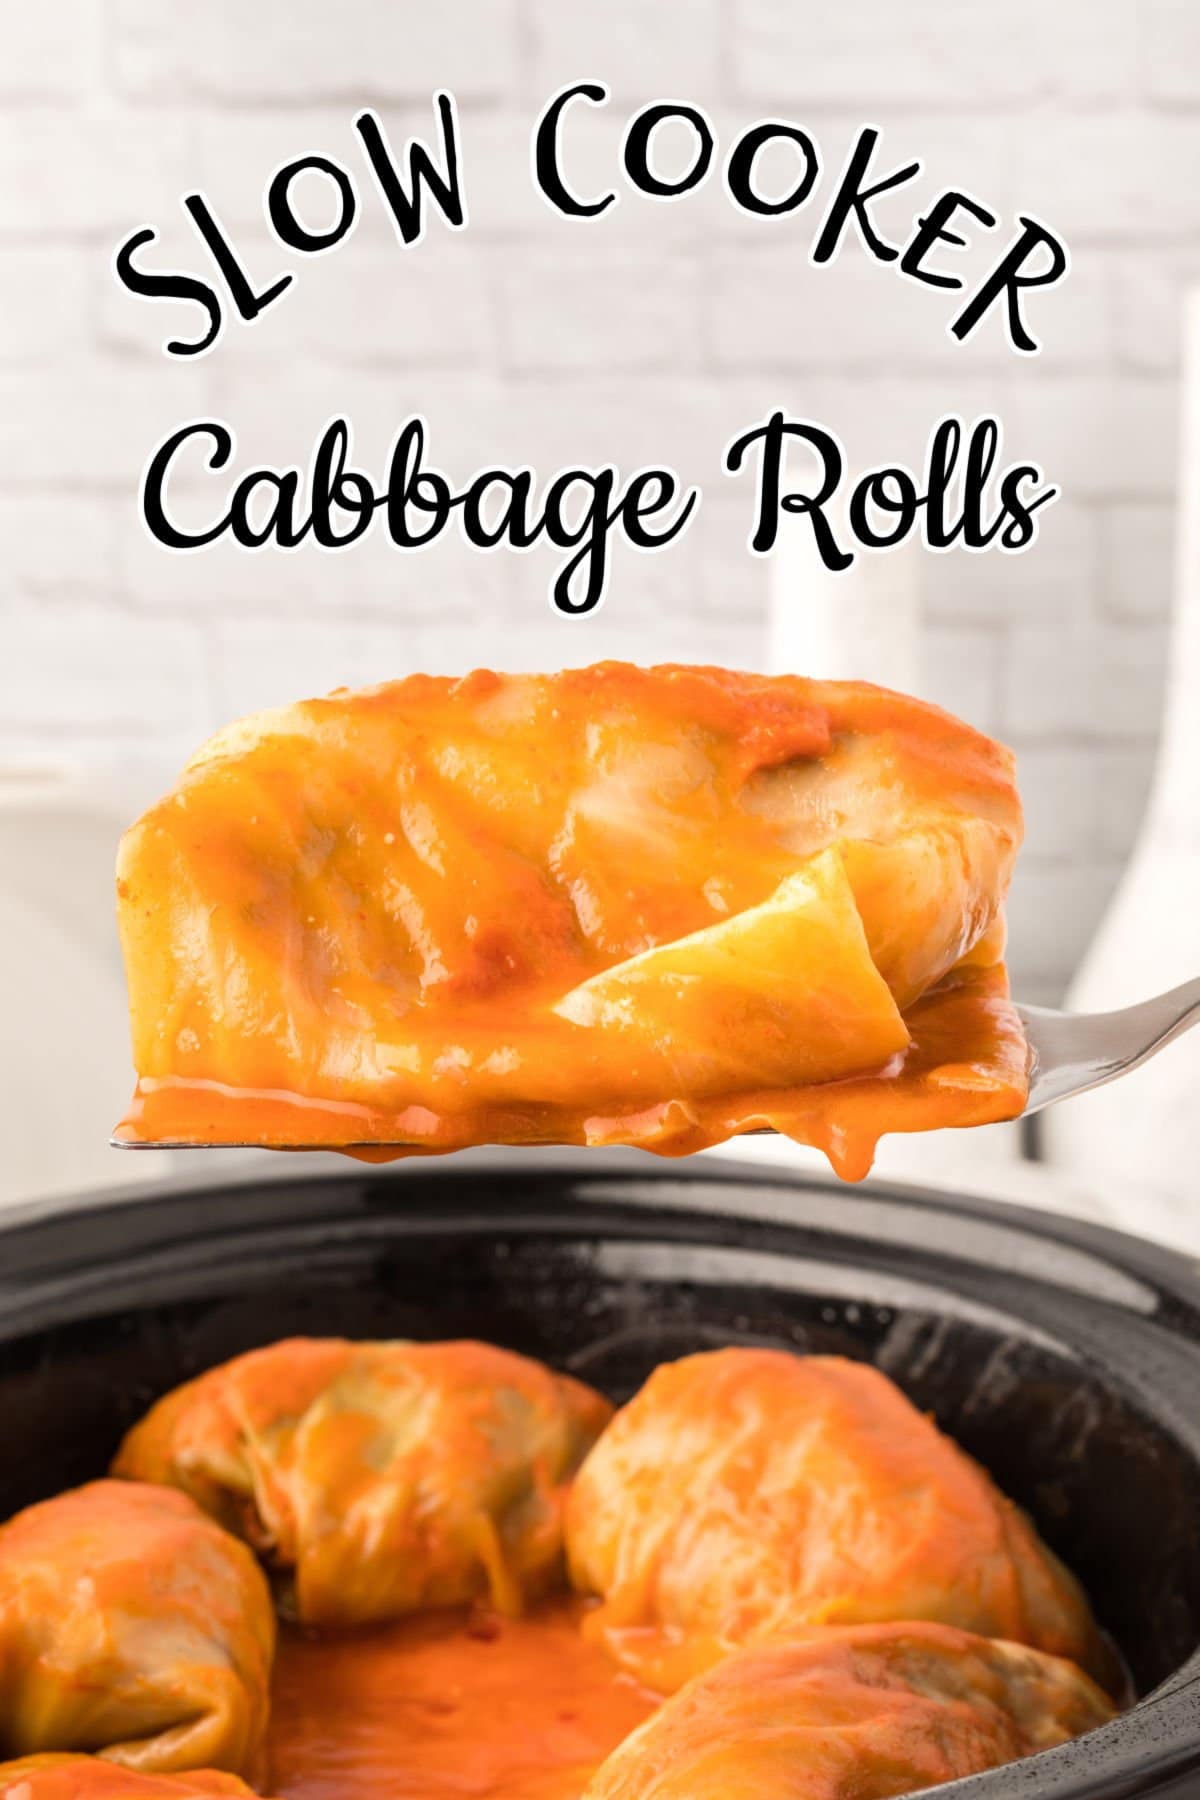 A cabbage roll being removed from the slow cooker.